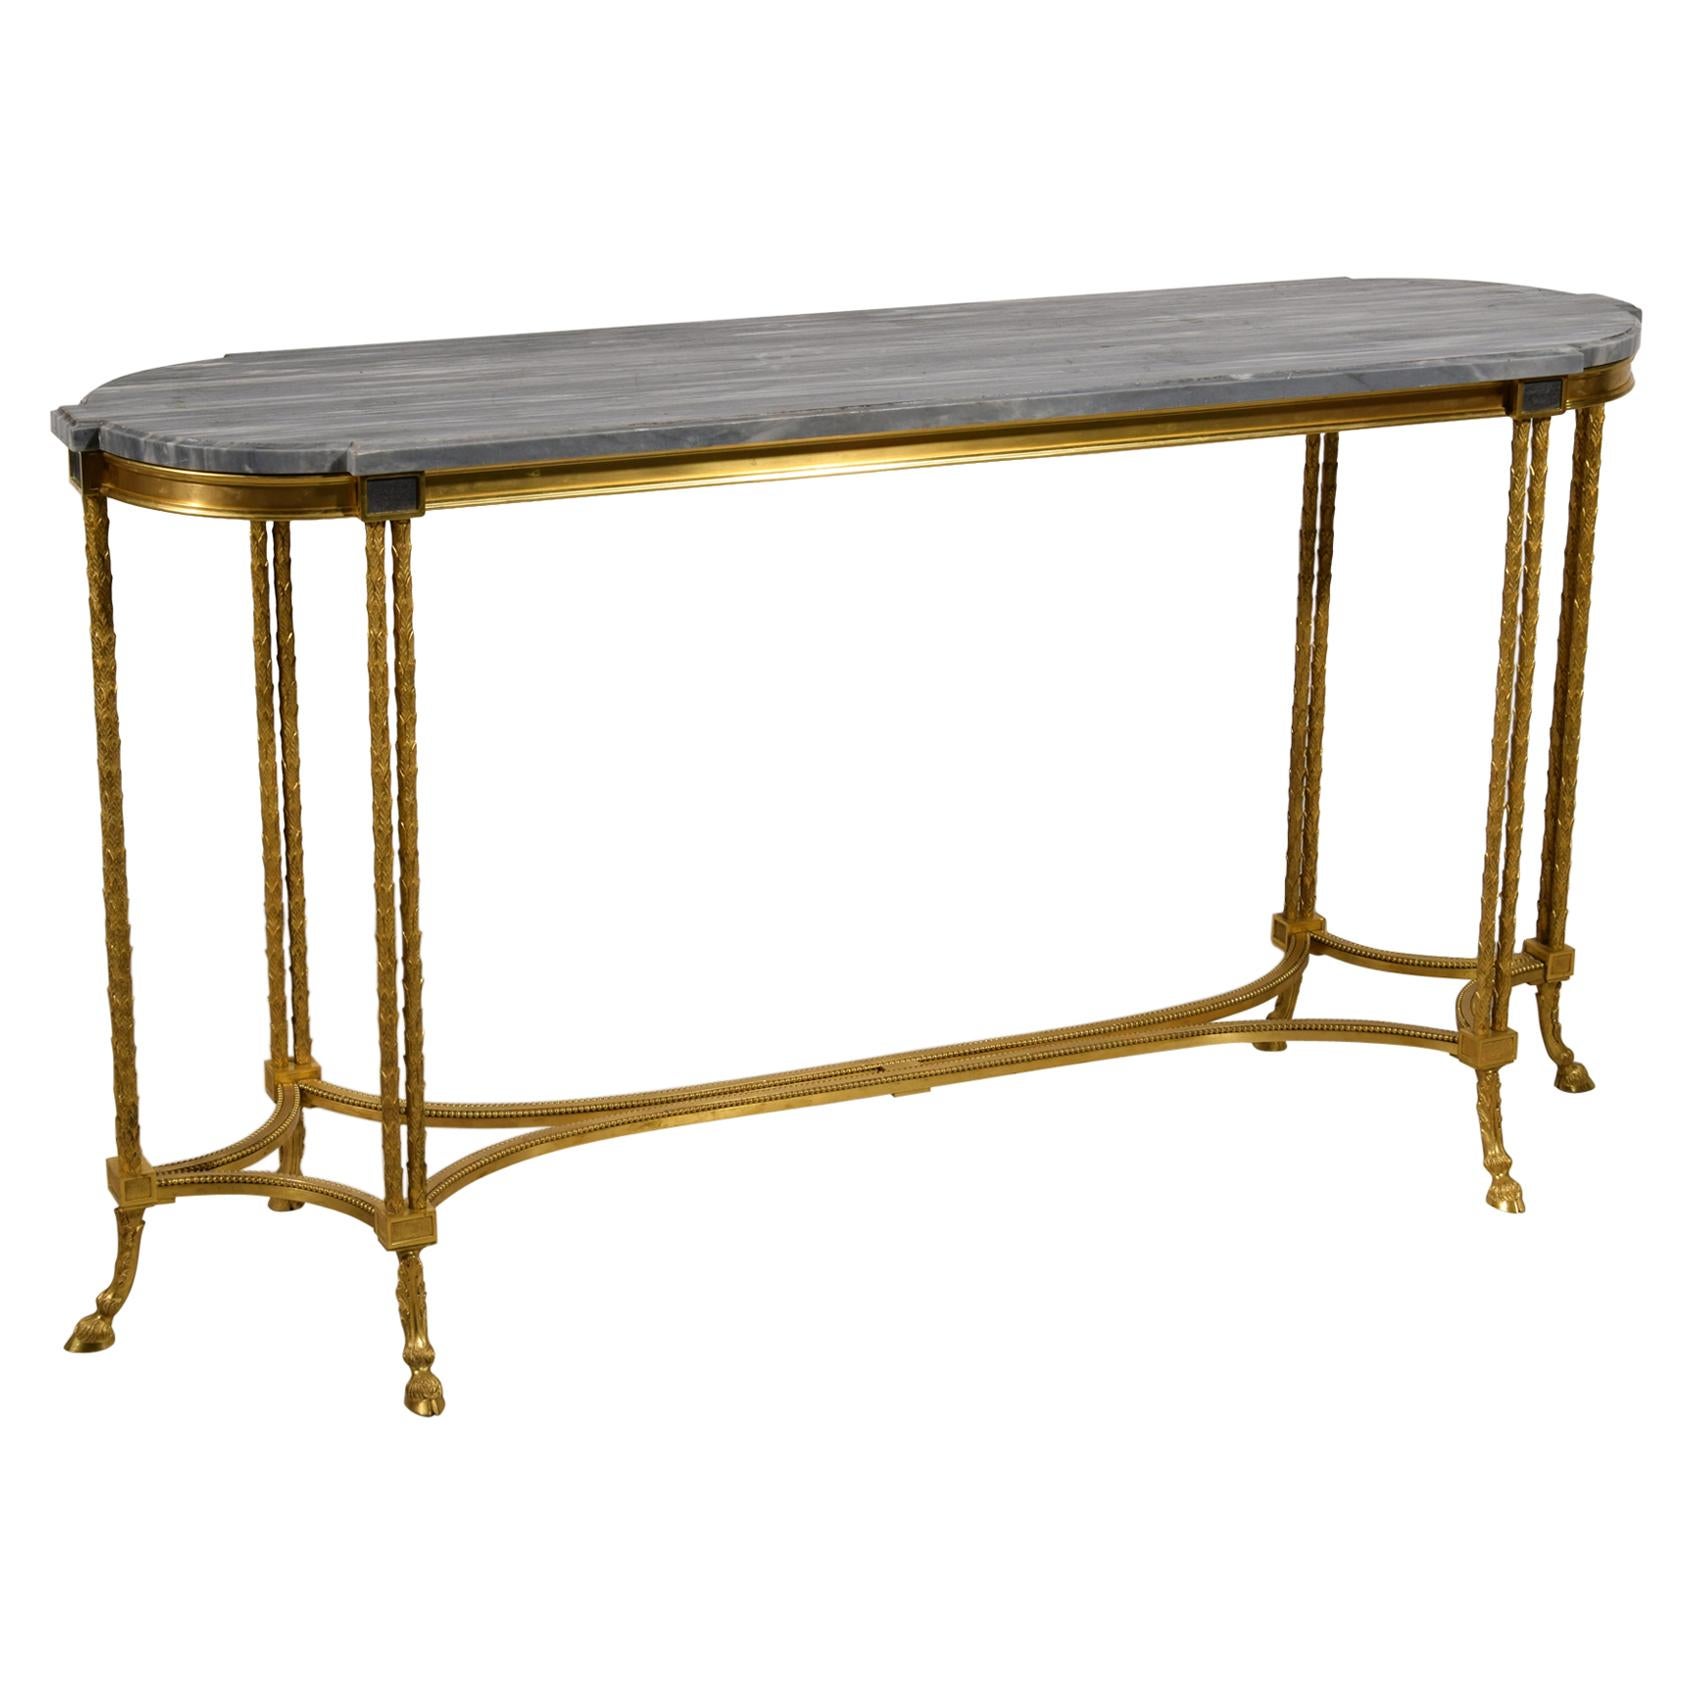 20th century, French Gilt Bronze Console Table by Maison Baguès 